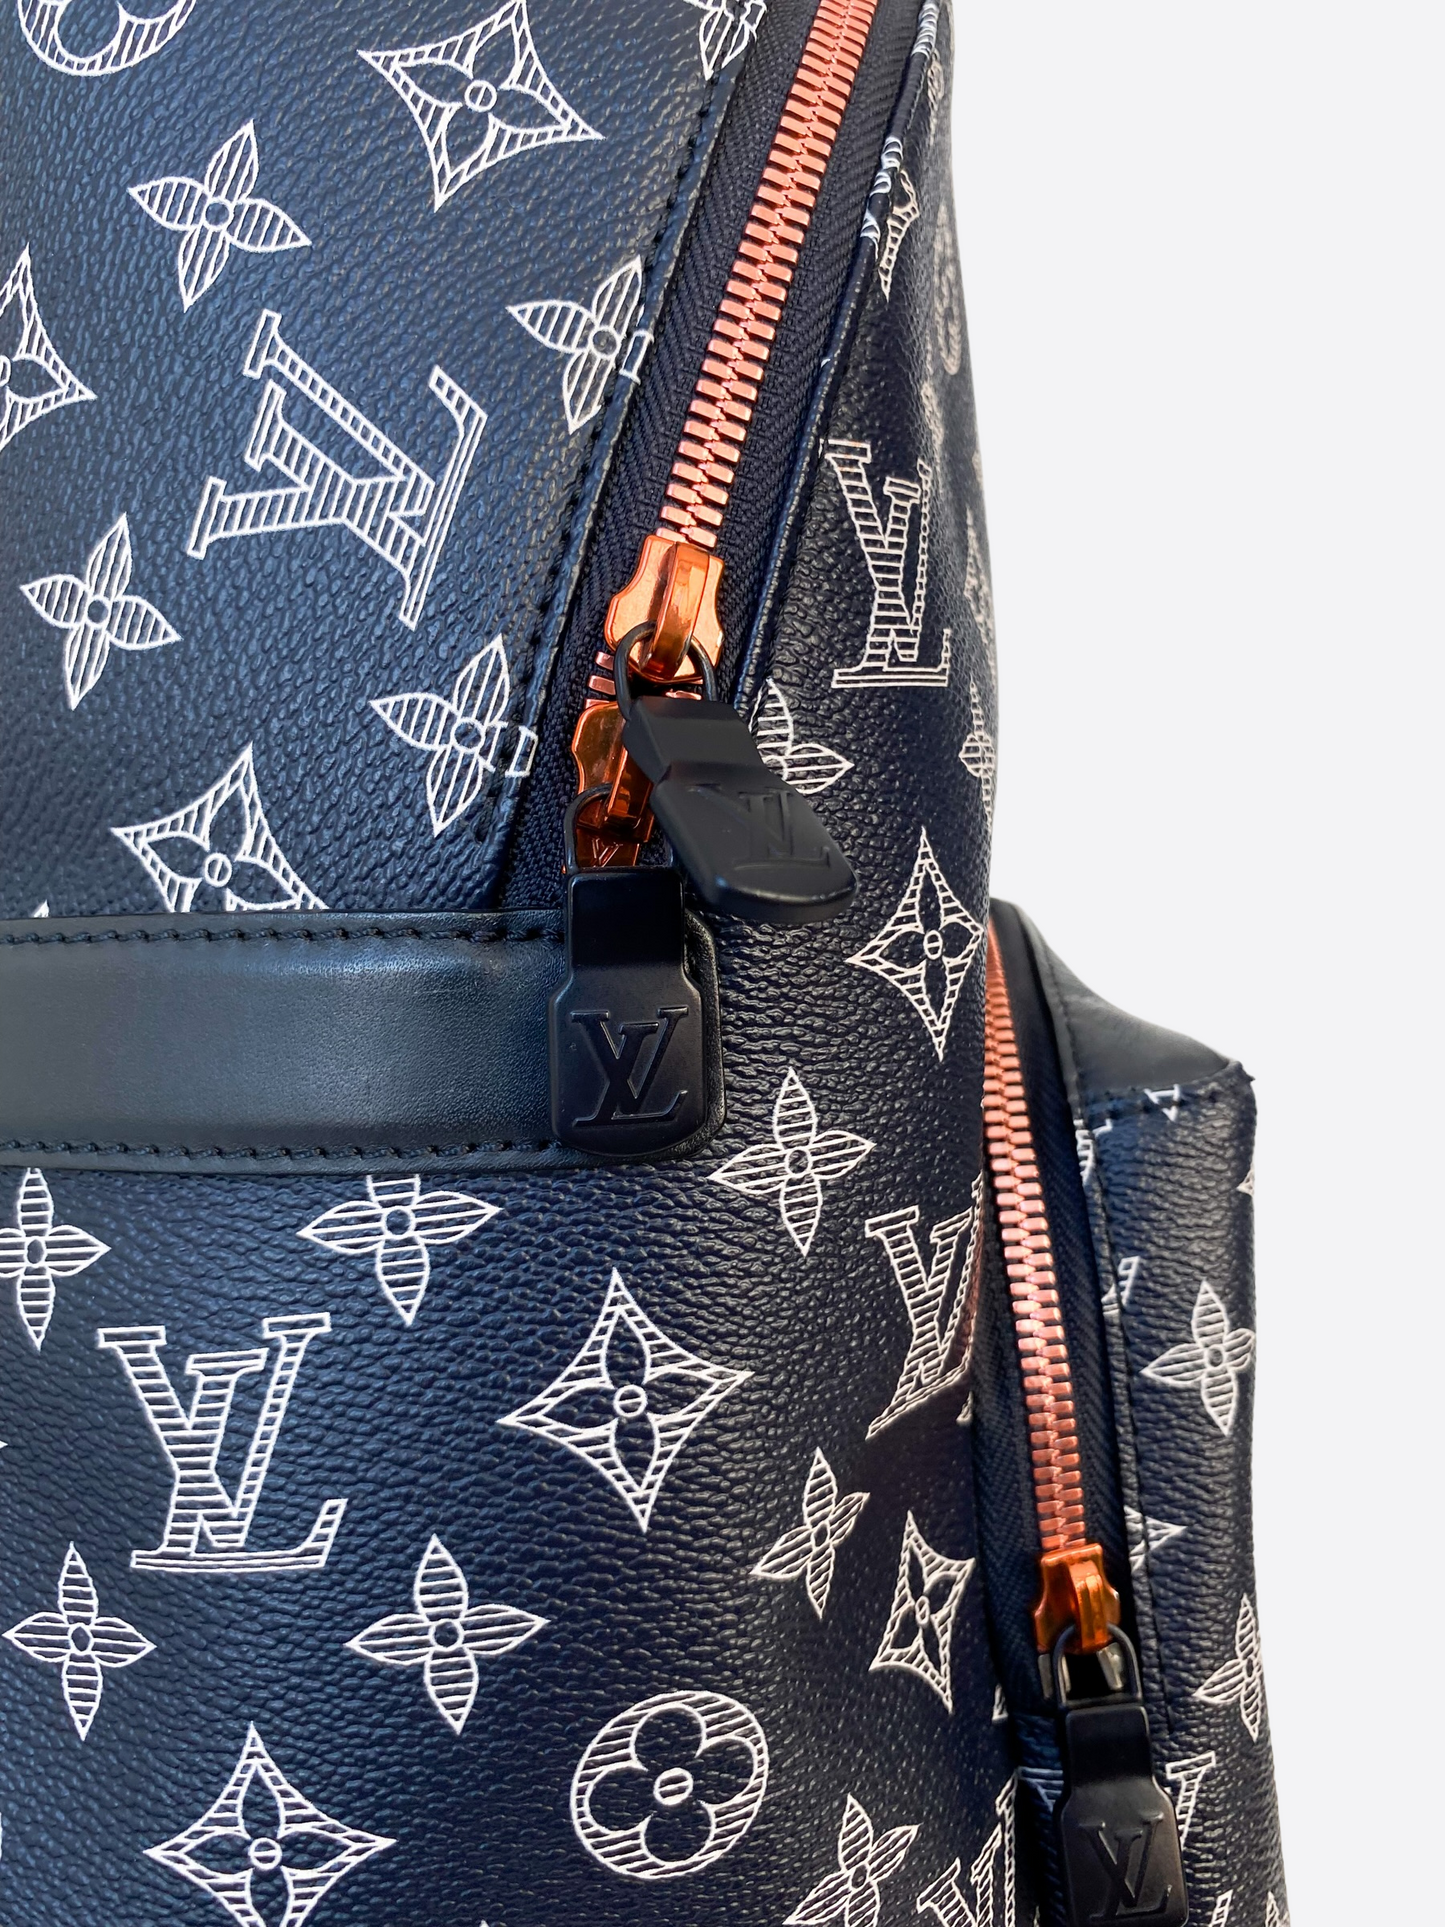 Louis Vuitton Upside Down Apollo Backpack - Limited Edition Kim